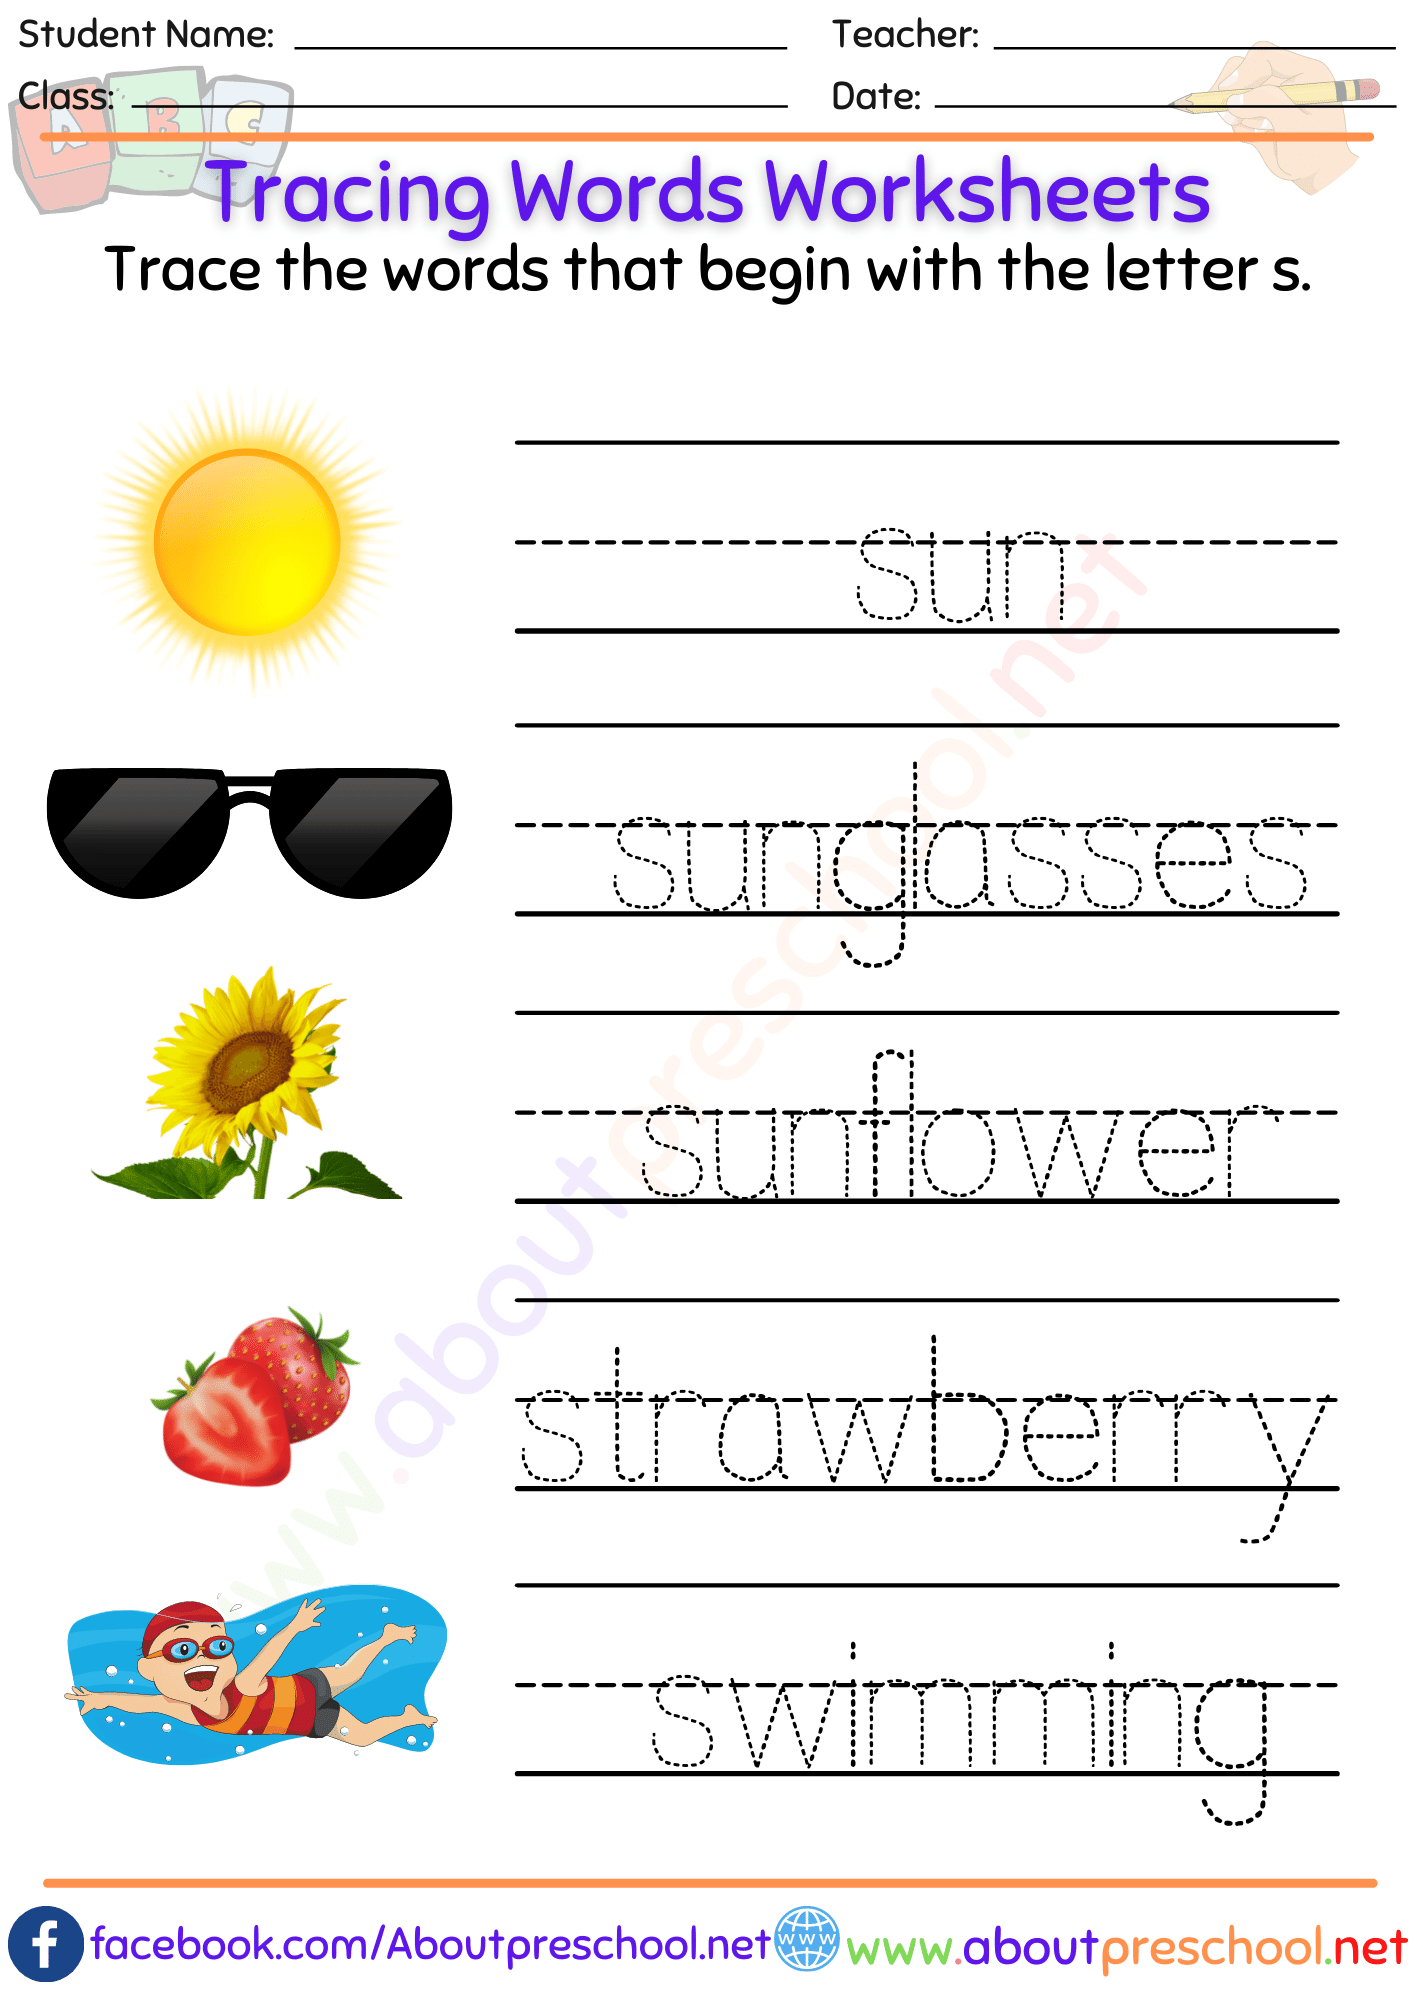 Tracing Words Worksheets s